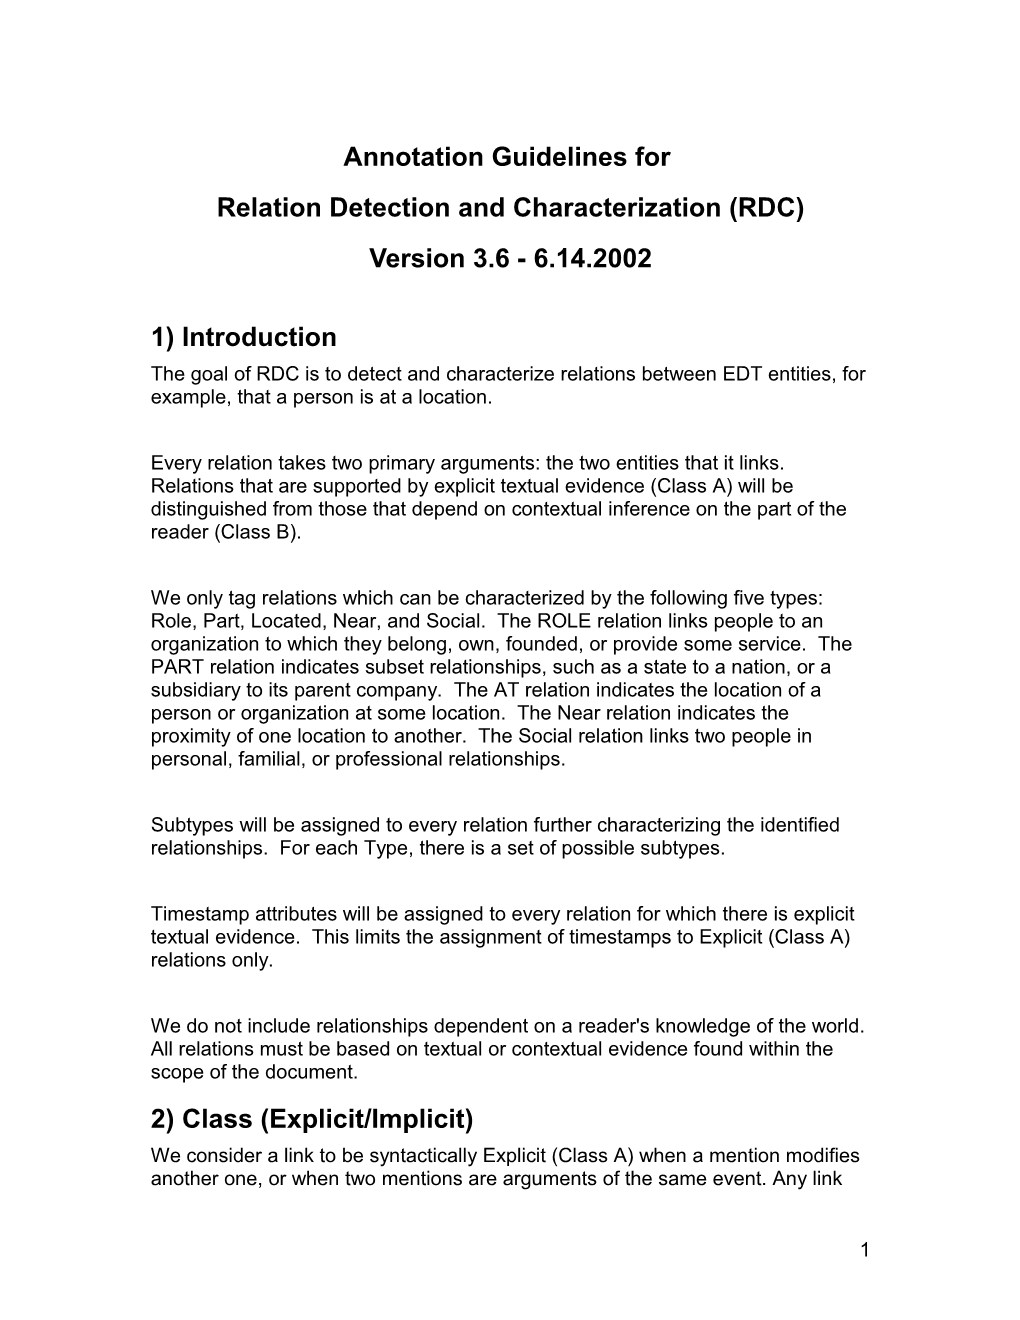 Relation Detection and Characterization (RDC)